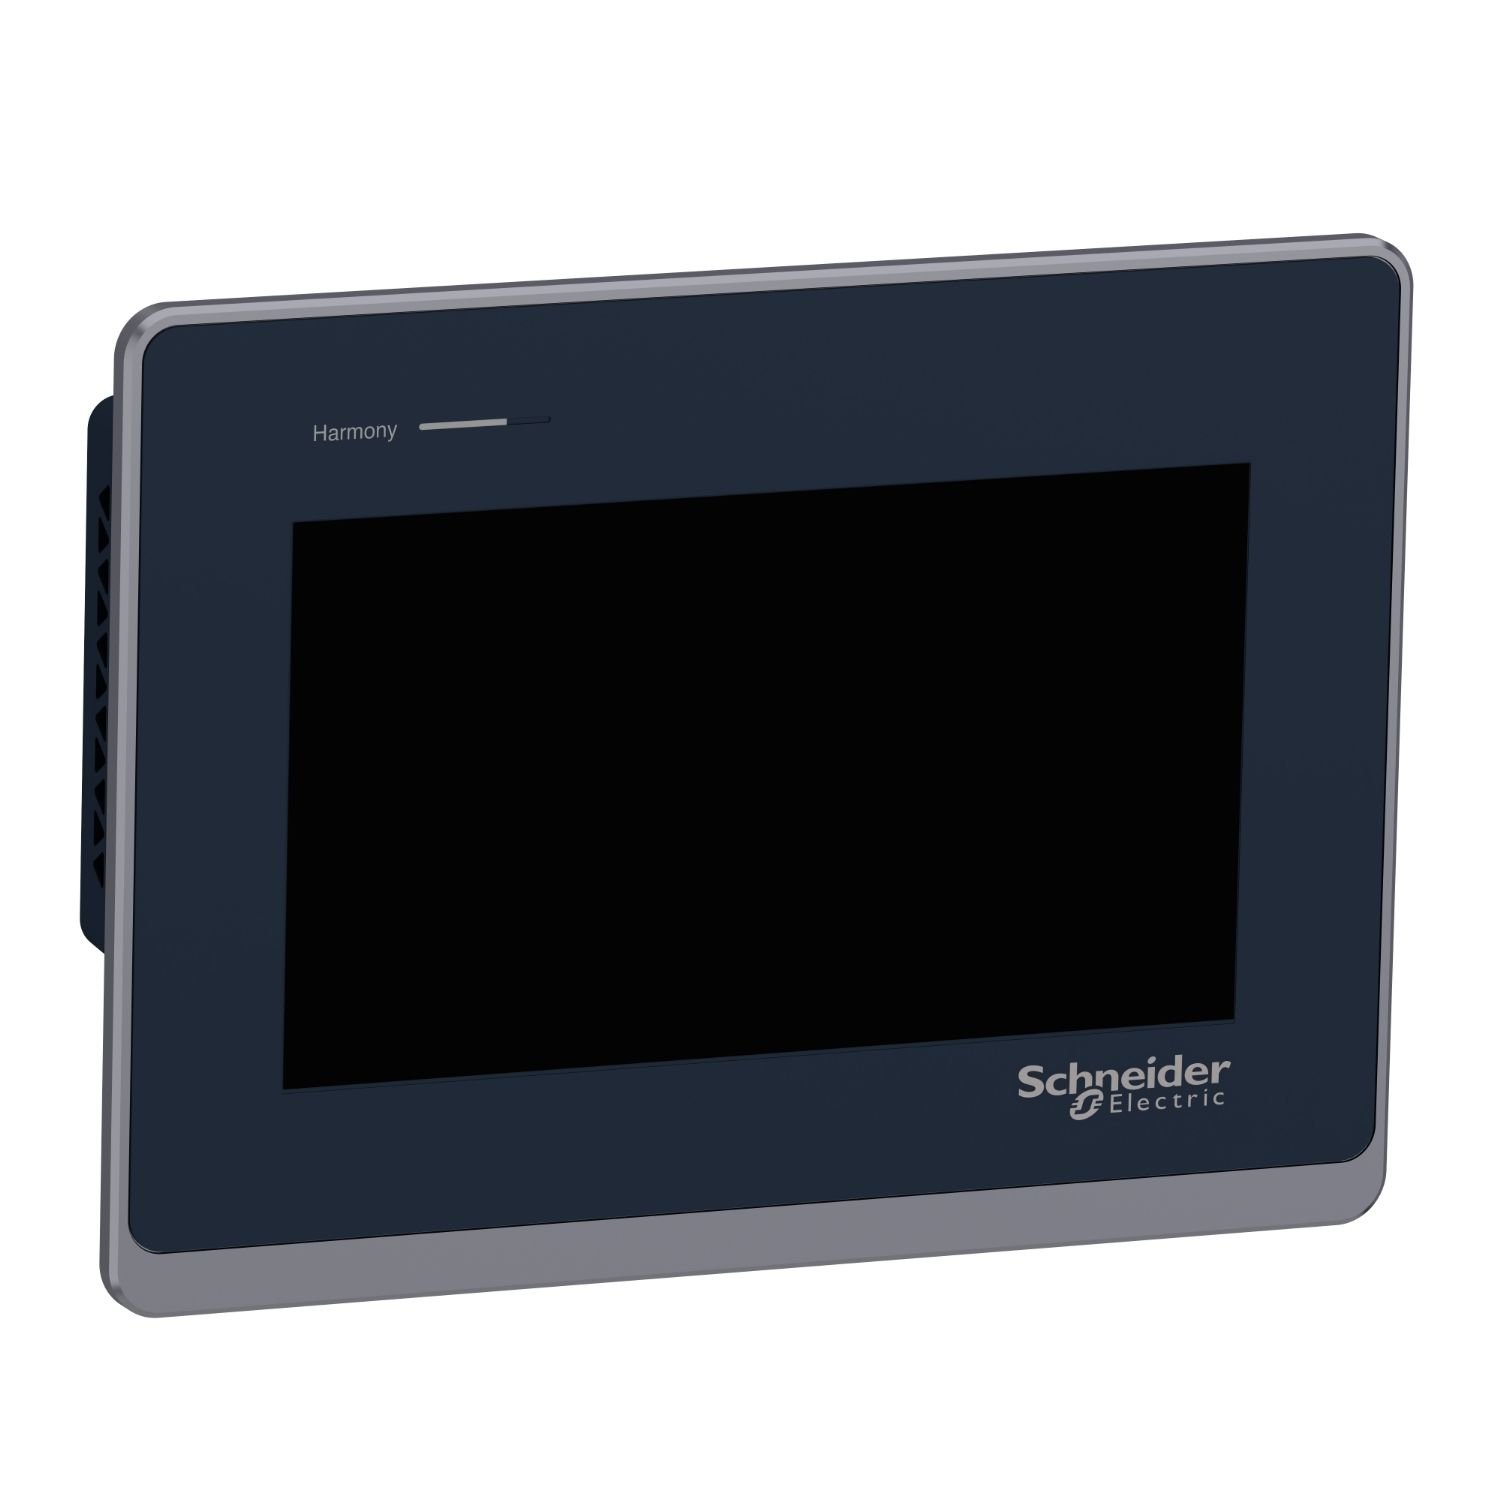 HMIST6400 touch panel screen, Harmony ST6, 7inch wide display, 2COM, 2Ethernet, USB host and device, 24V DC